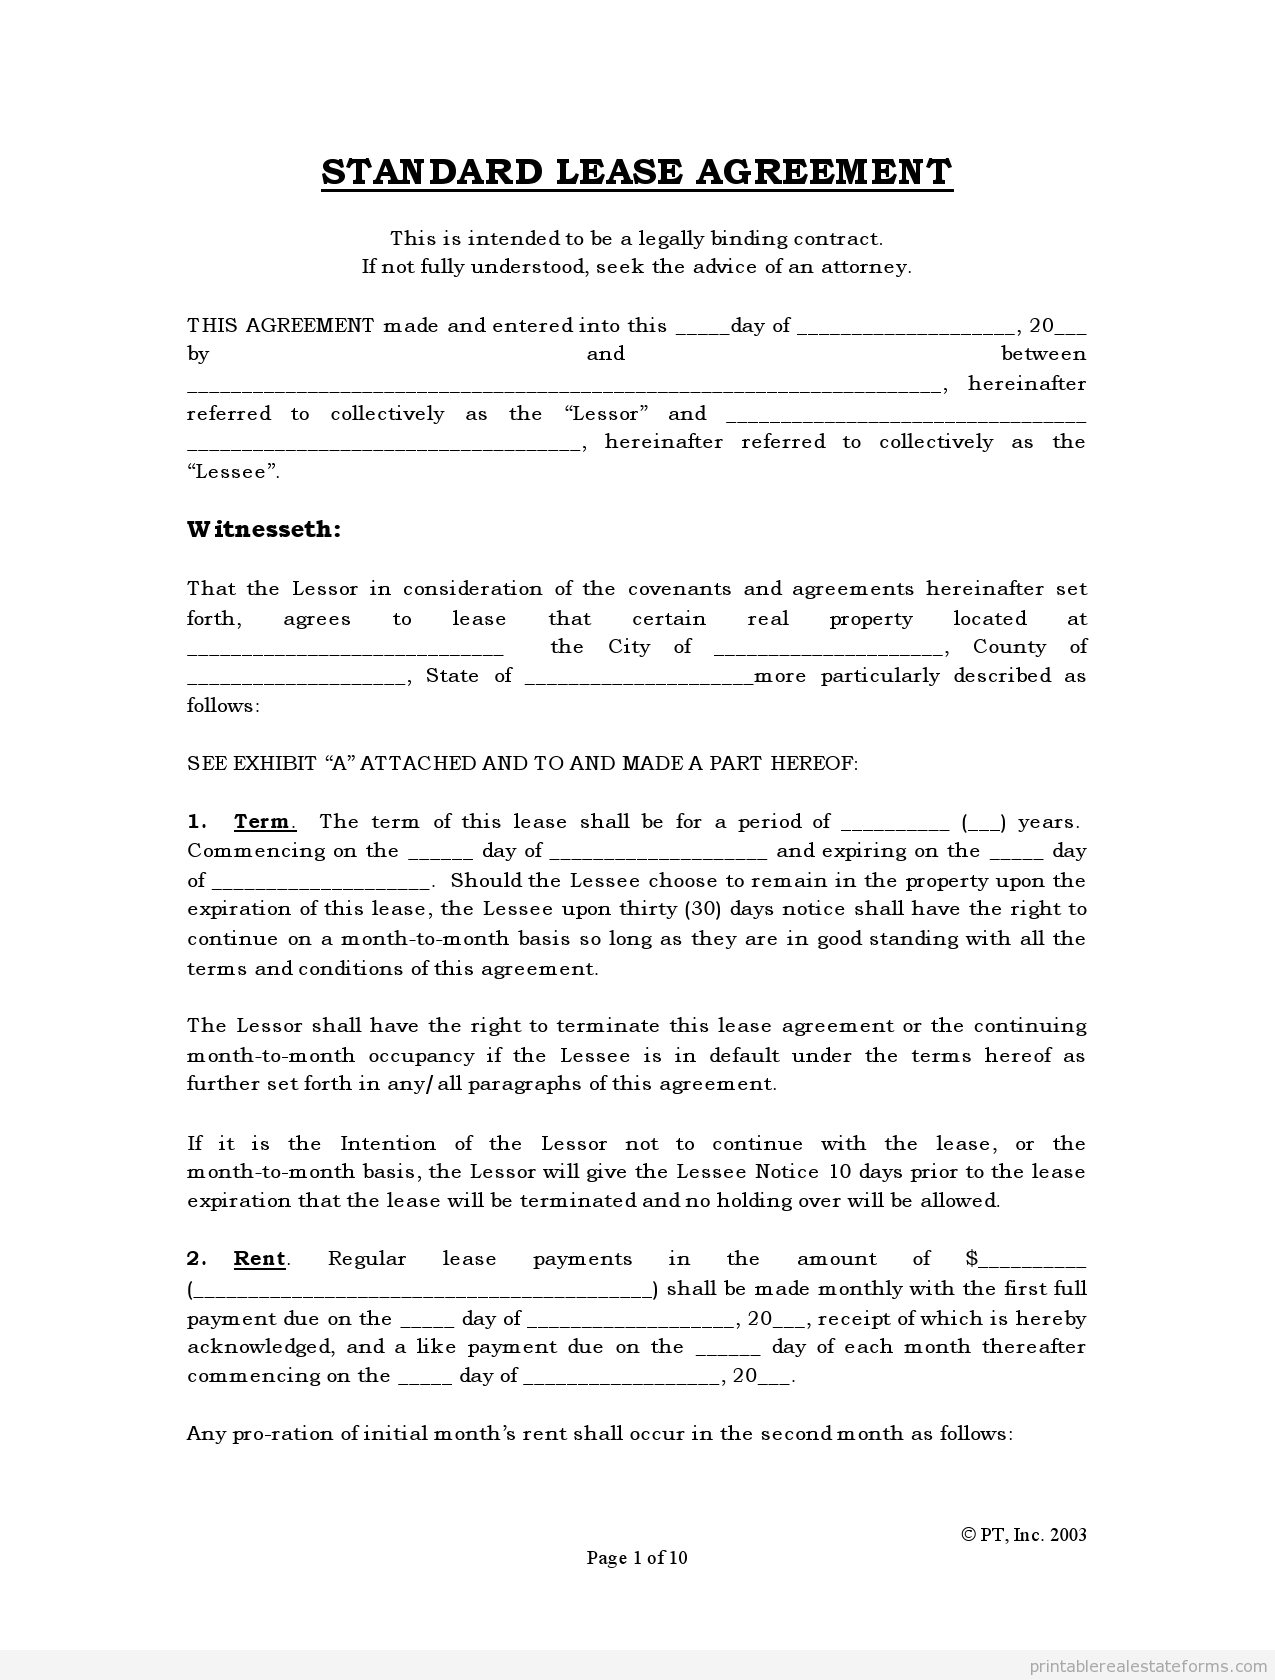 Free Rental Agreements To Print | Free Standard Lease Agreement Form - Free Printable Residential Rental Agreement Forms